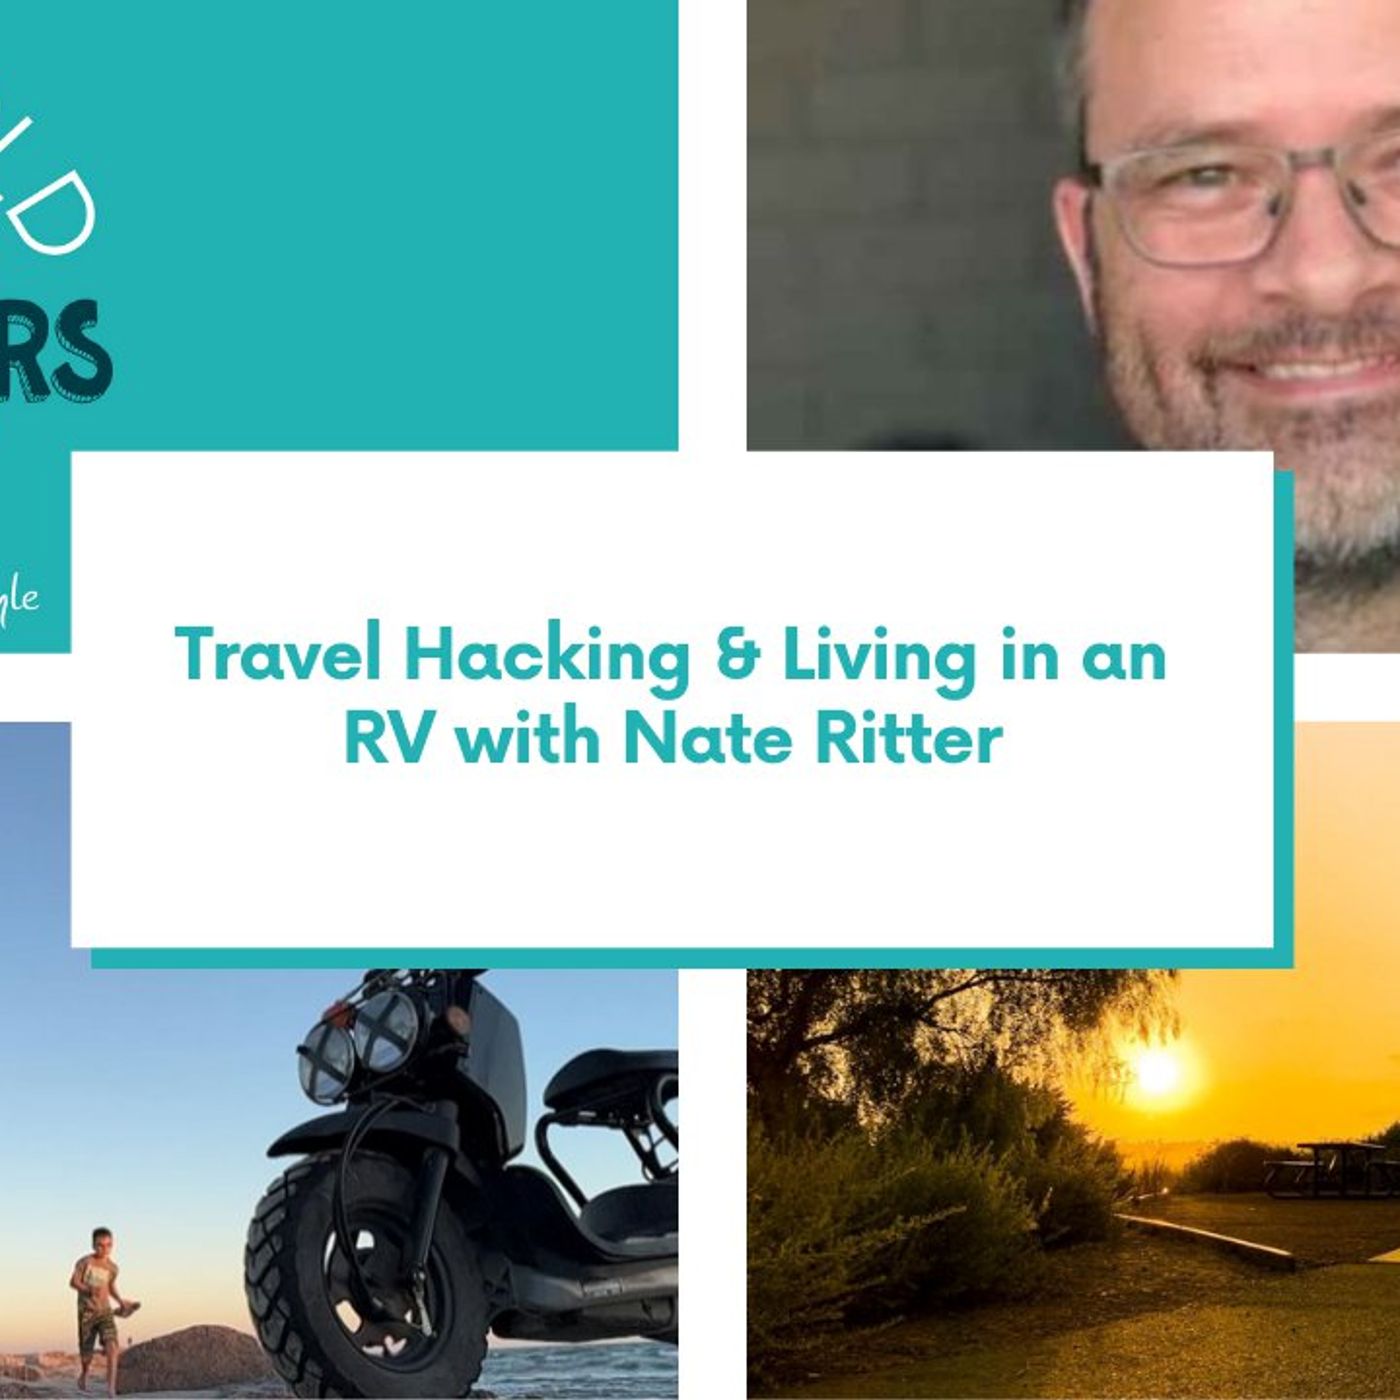 Travel Hacking & Living in an RV with Nate Ritter